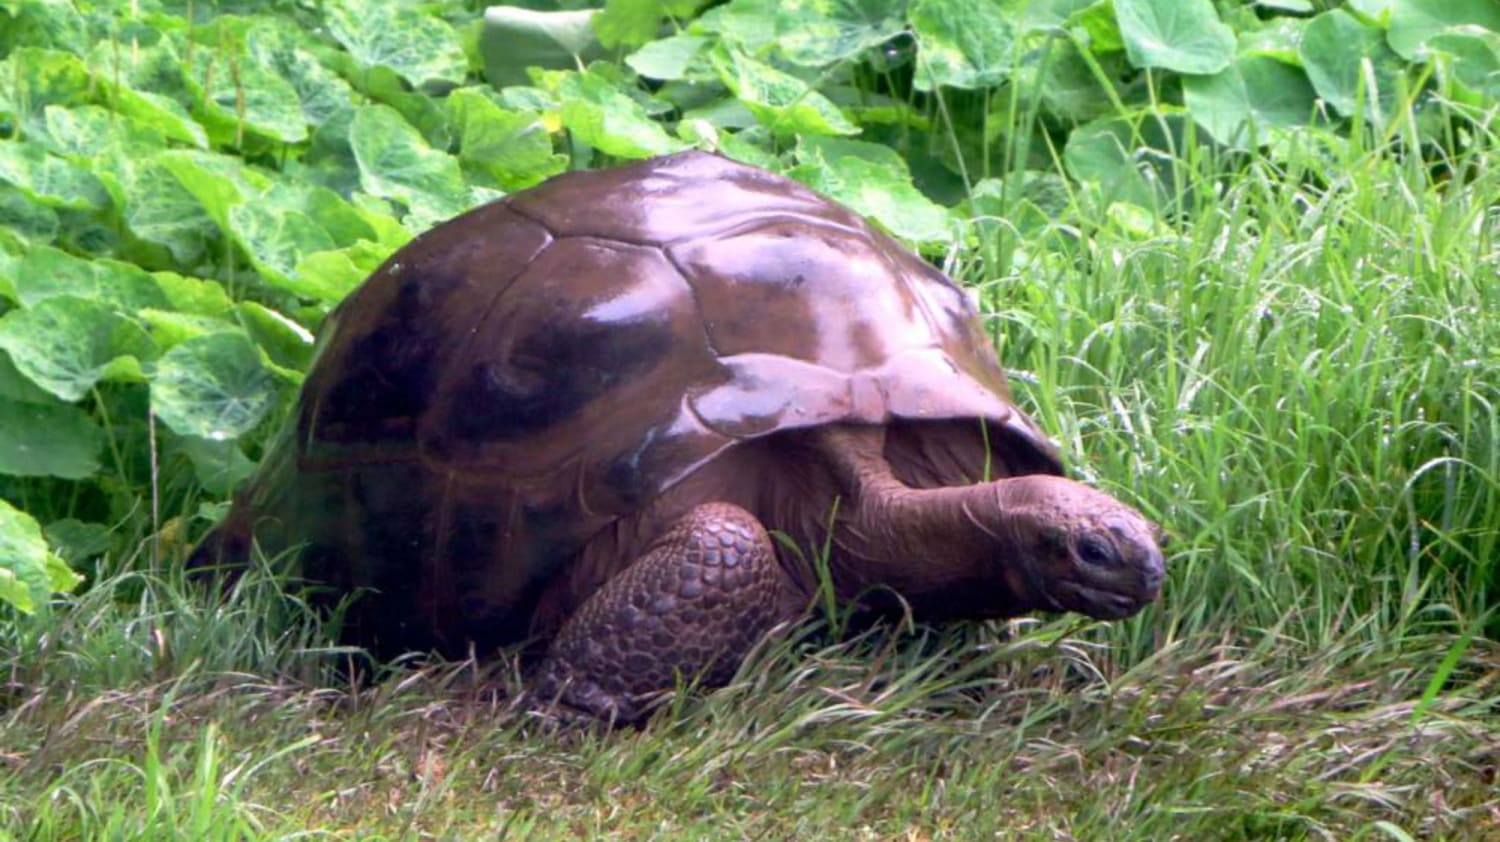 Meet Jonathan, the 187-Year-Old Tortoise and the World's Oldest Land Animal